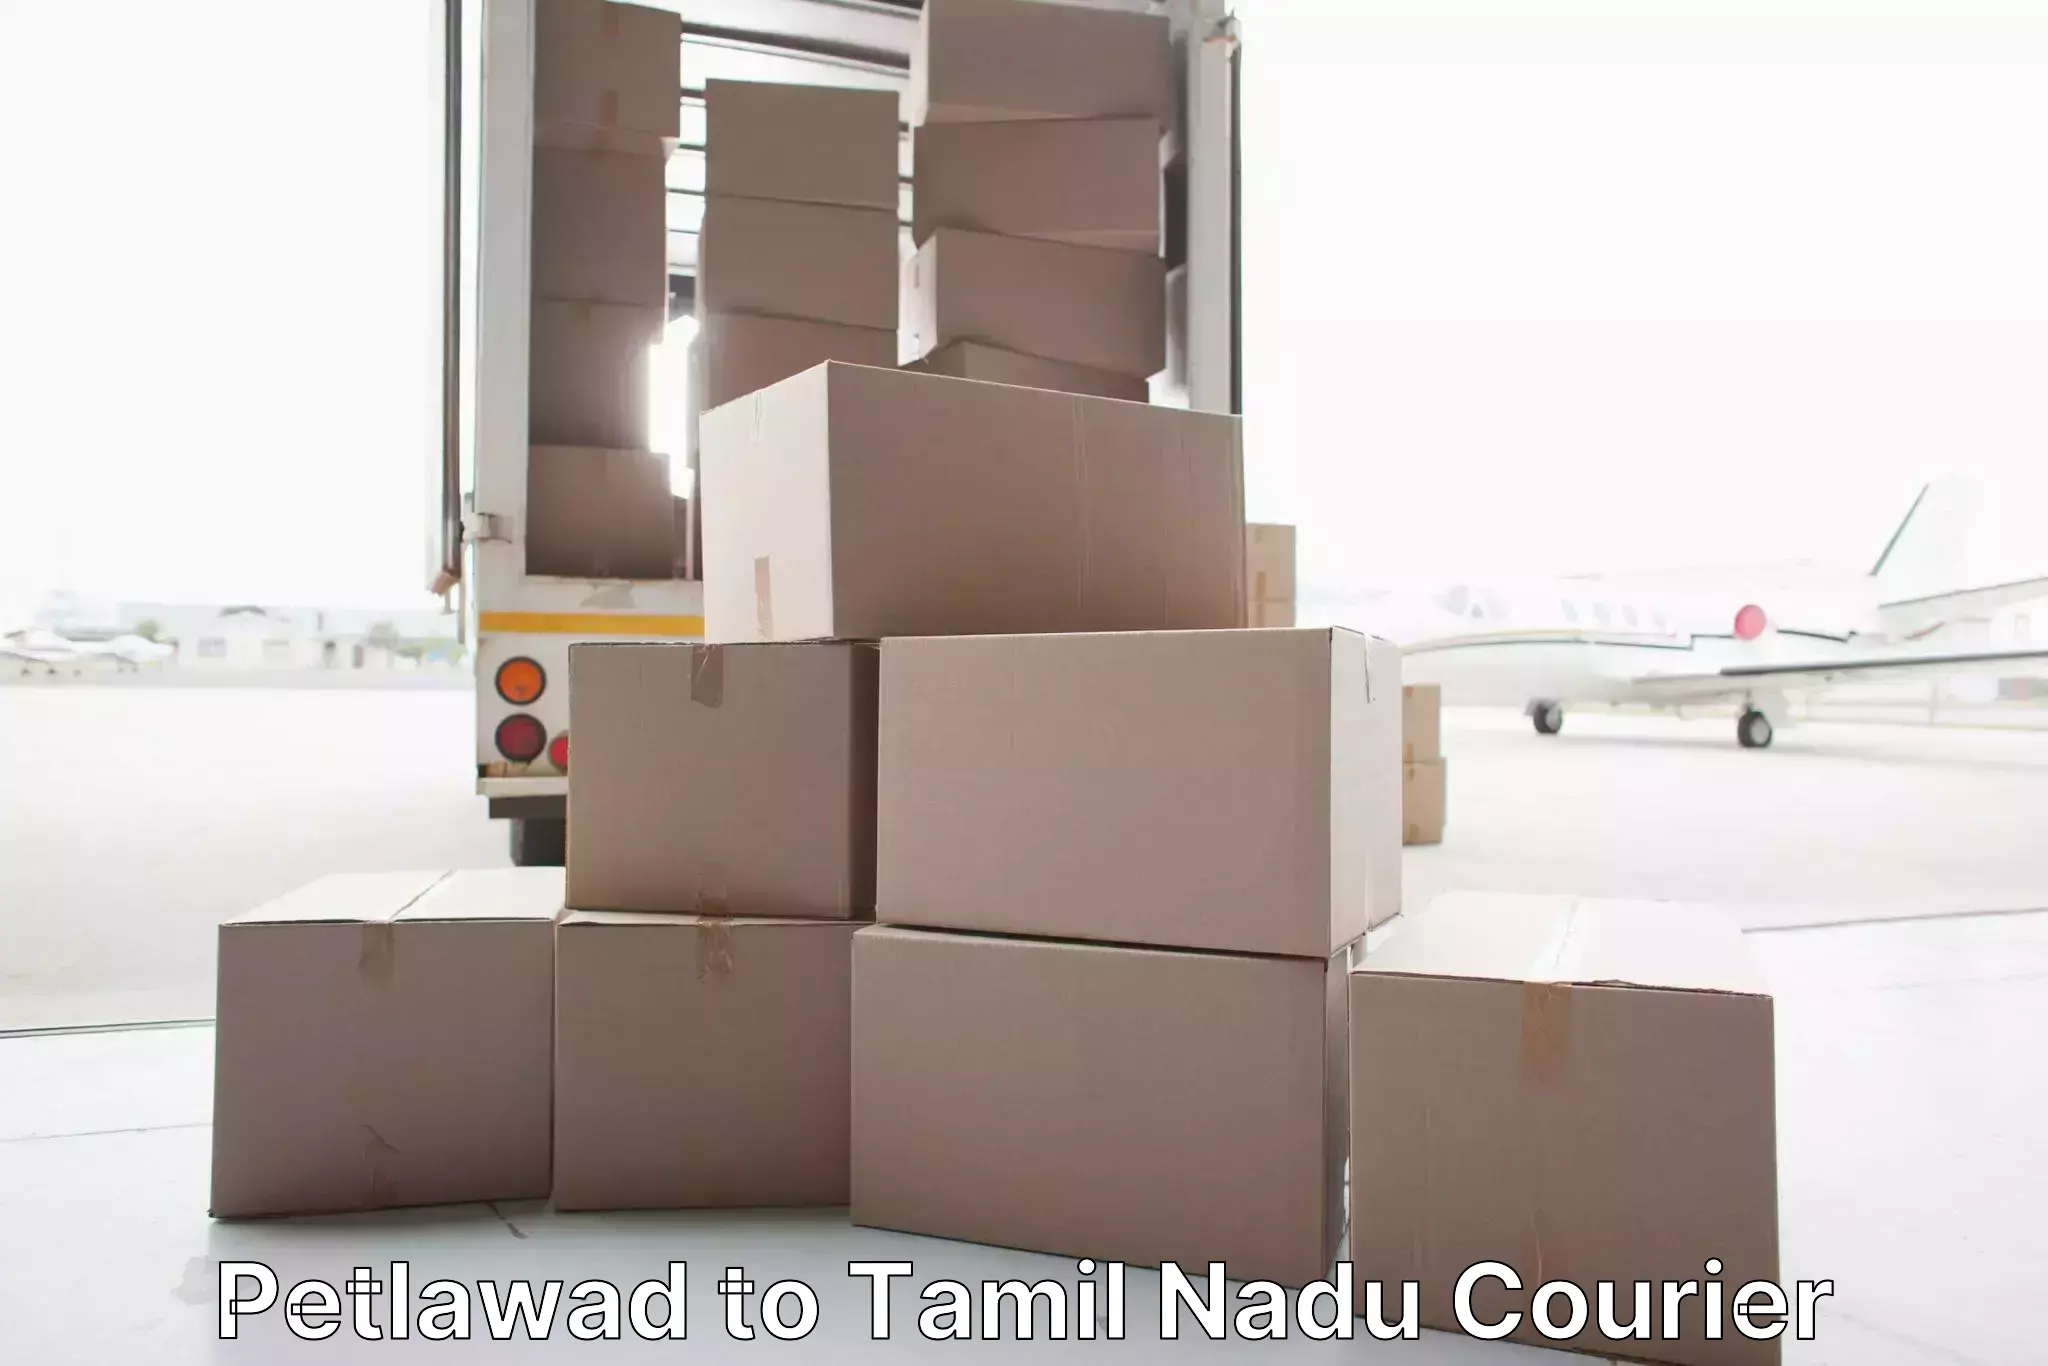 Cost-effective moving options Petlawad to Trichy